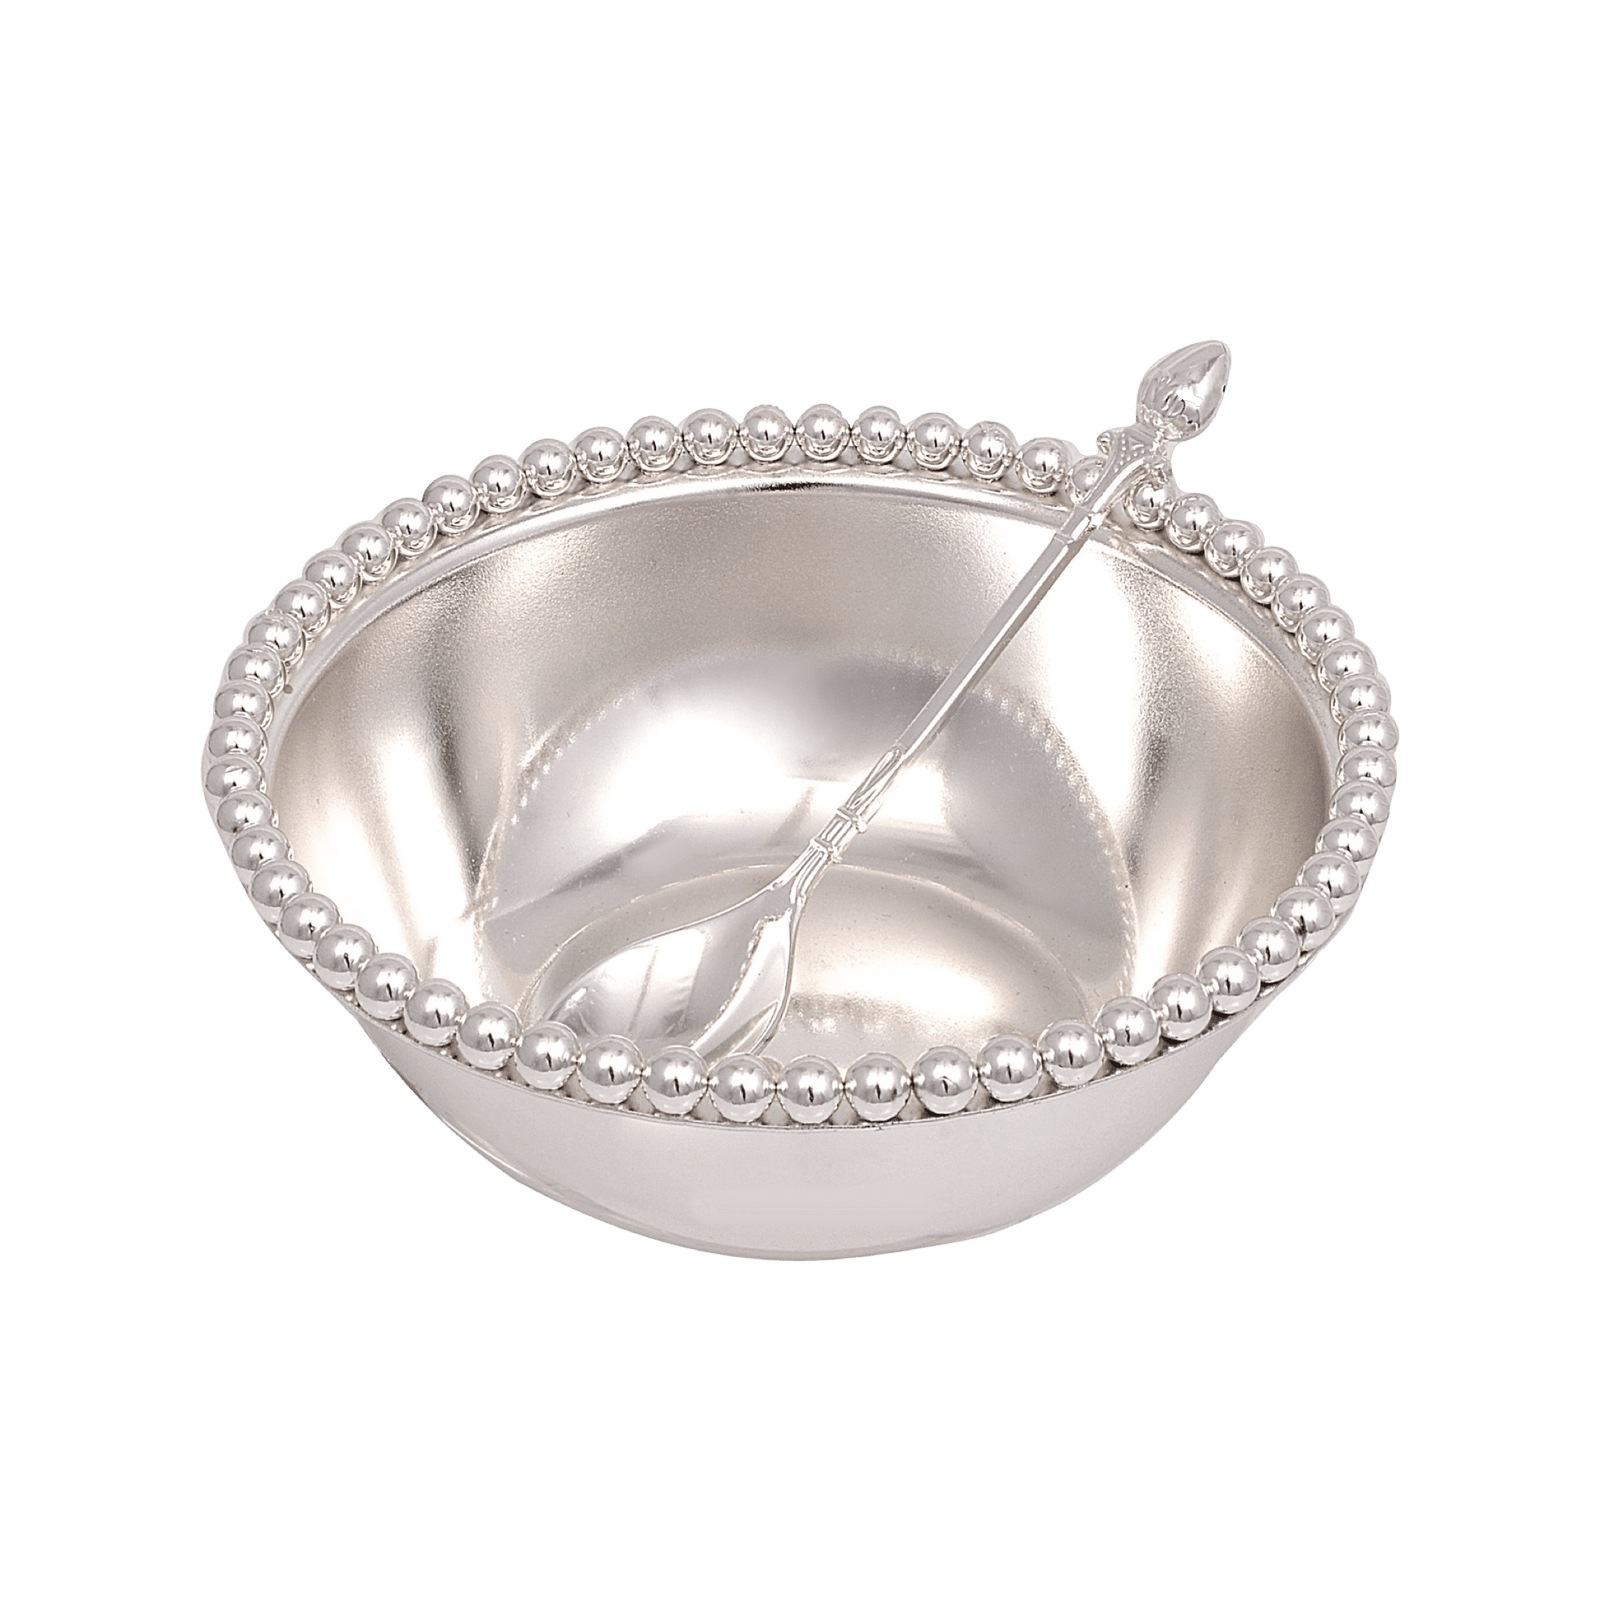 A Silver Plated Bowl with Beaded Rim & spoon